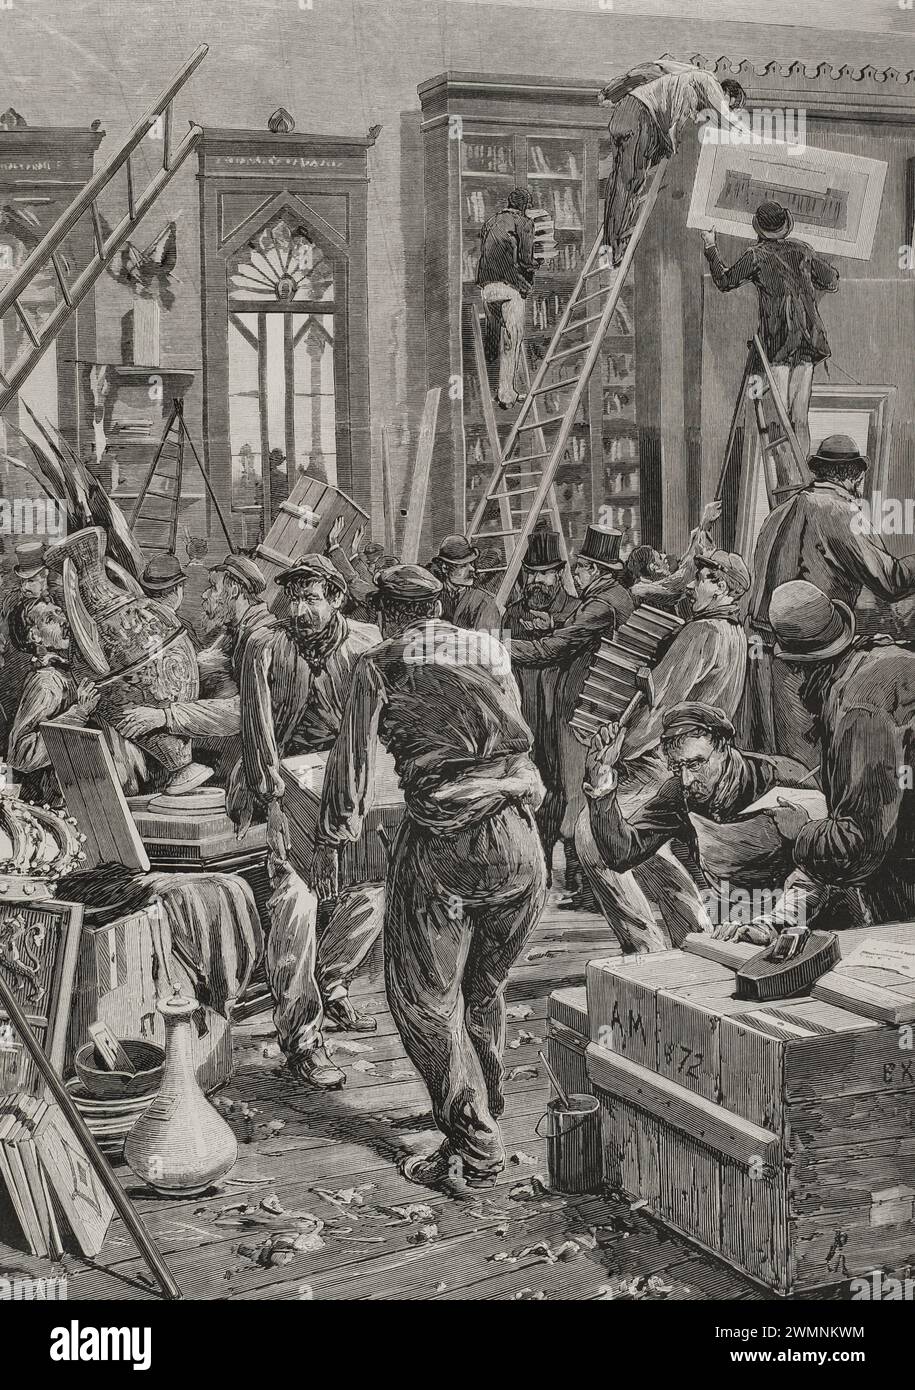 France, Paris. Universal Exhibition of 1878. It was held from May 1 to November 10, 1878. Spanish section in the exhibition: workers packing the installations and objects. Engraving by Rico. La Ilustración Española y Americana (The Spanish and American Illustration), 1878. Stock Photo